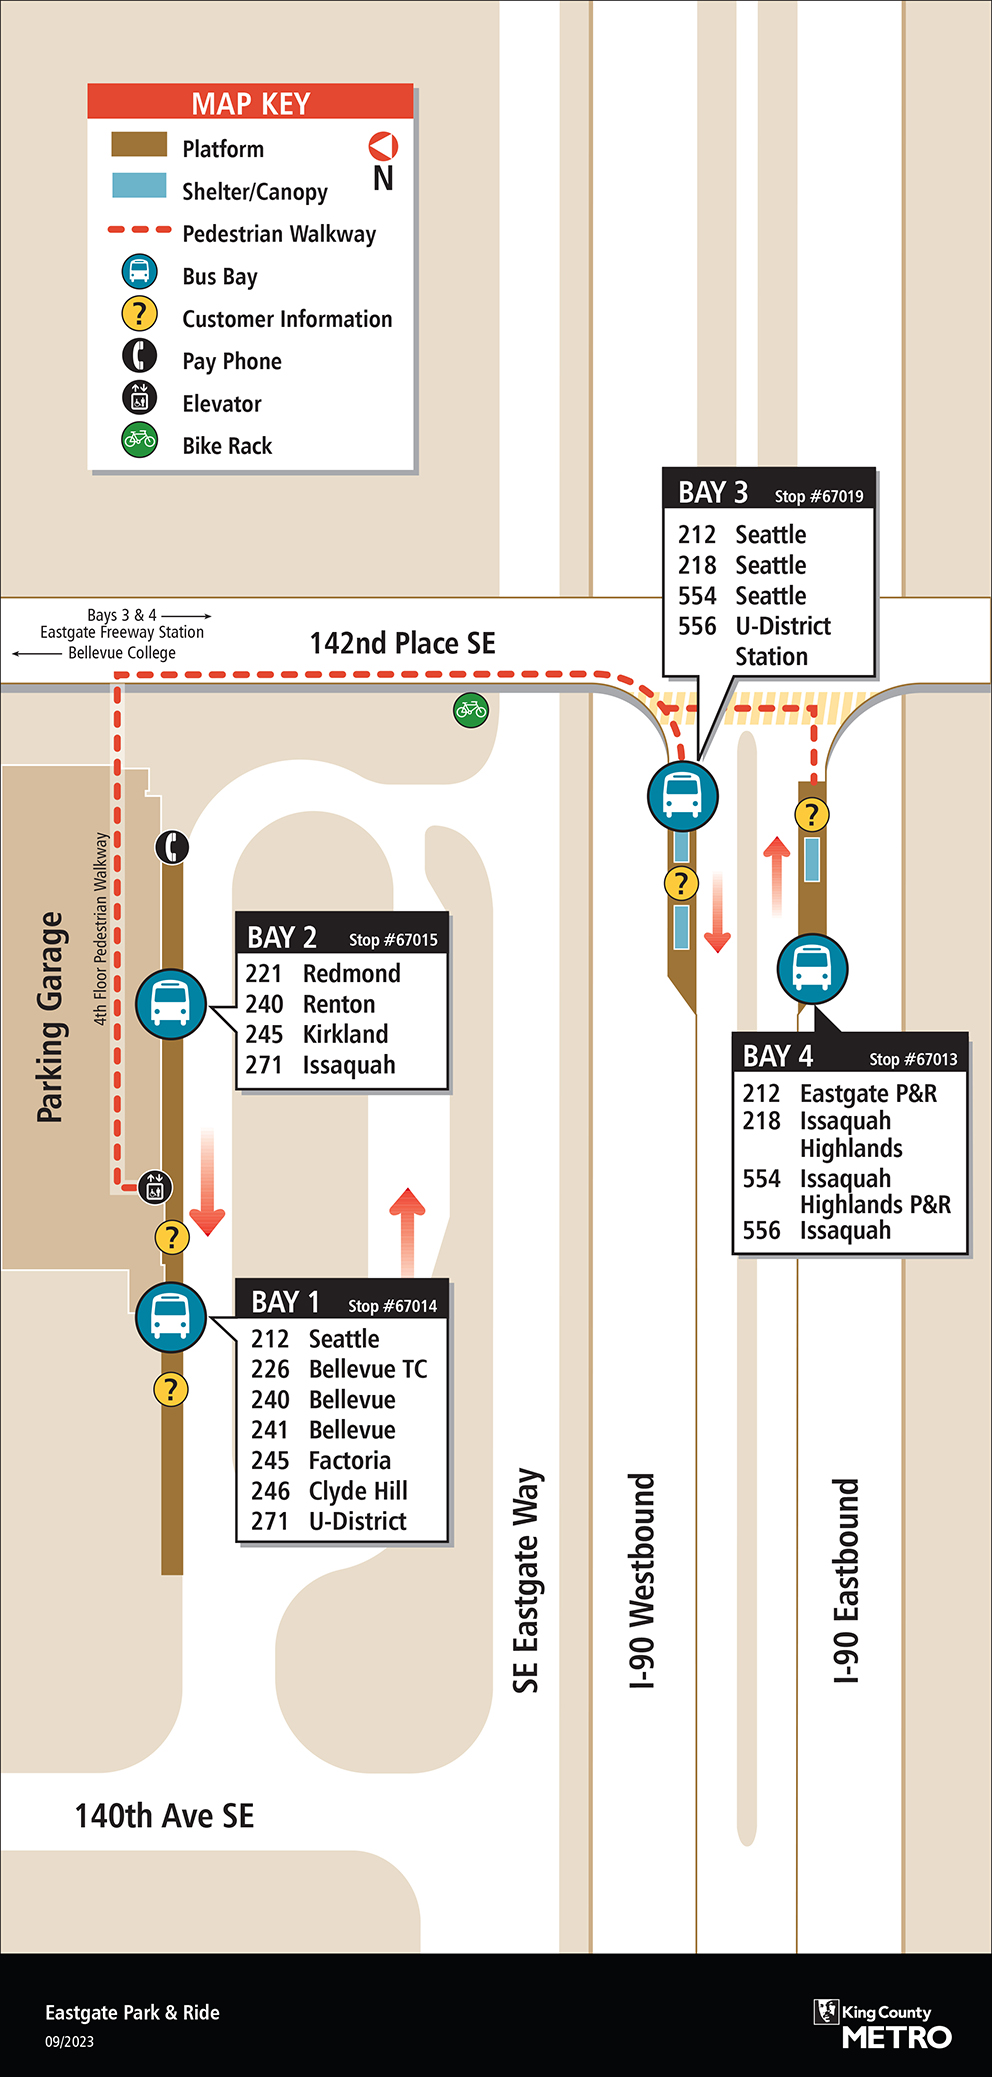 Map showing Eastgate Park & Ride boarding locations